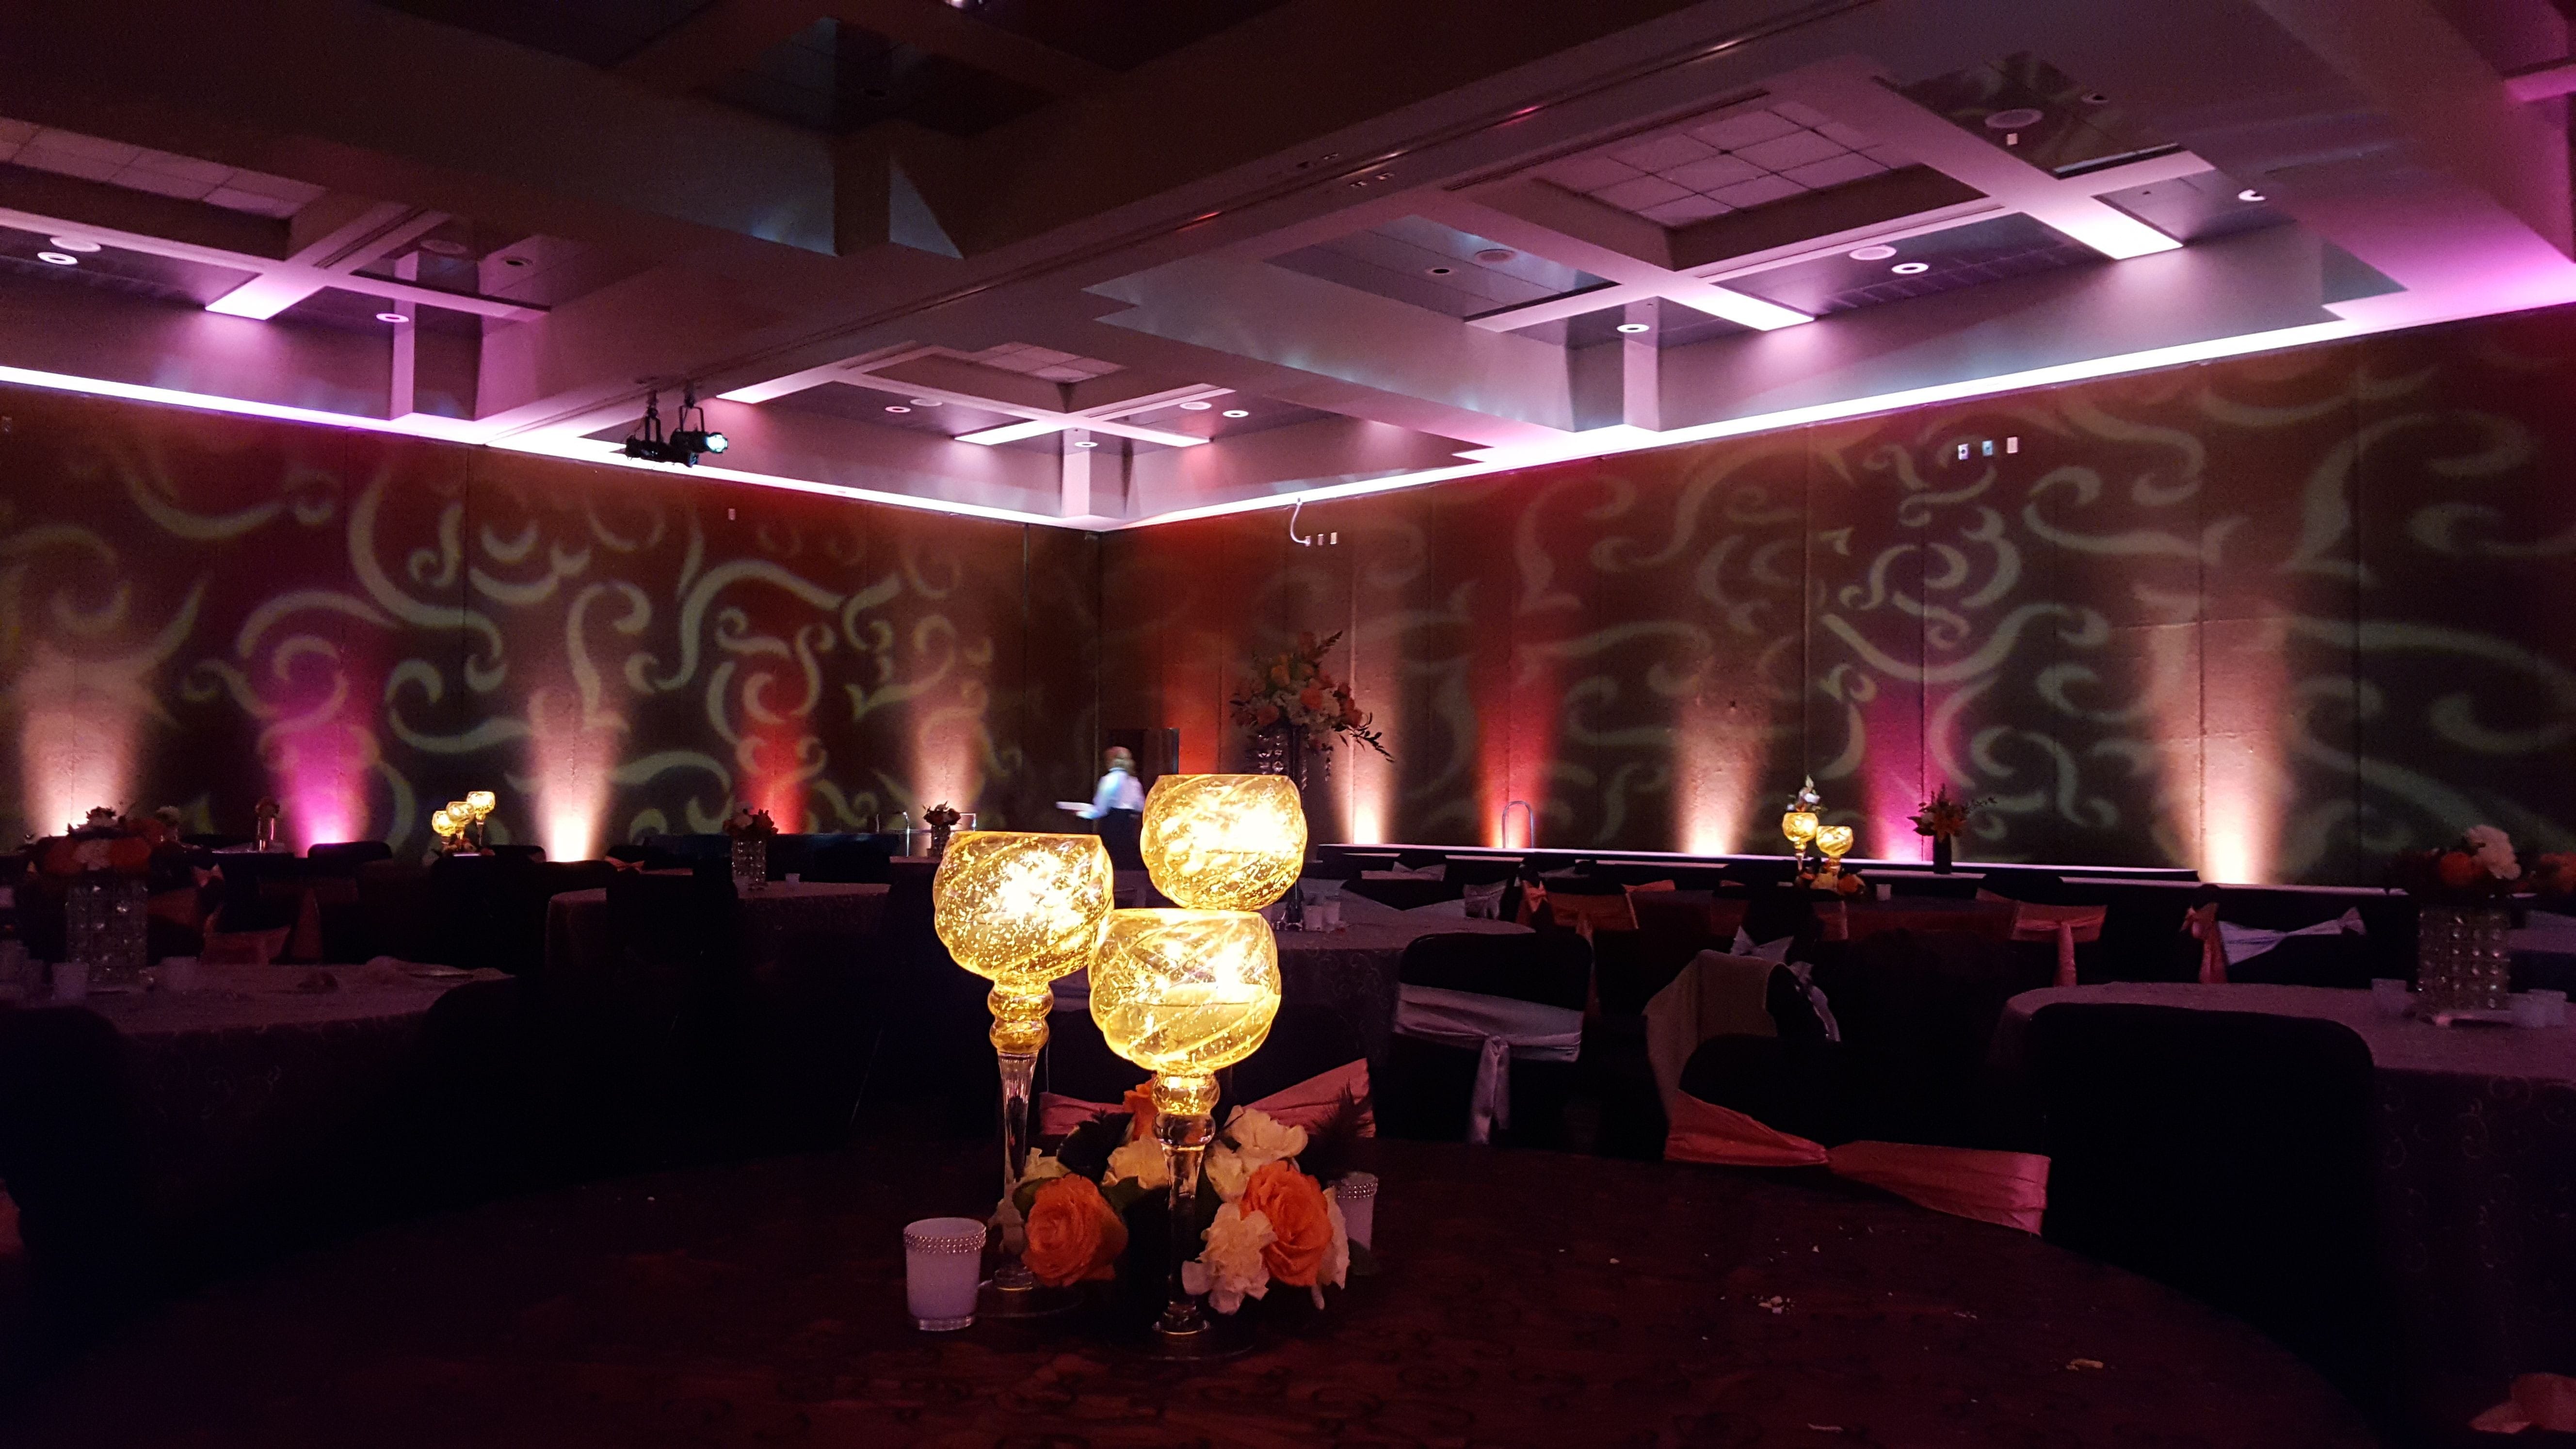 Fancy wedding lighting at the DECC. Up lighting in 2 tone pink and red with fancy patterns on the walls.